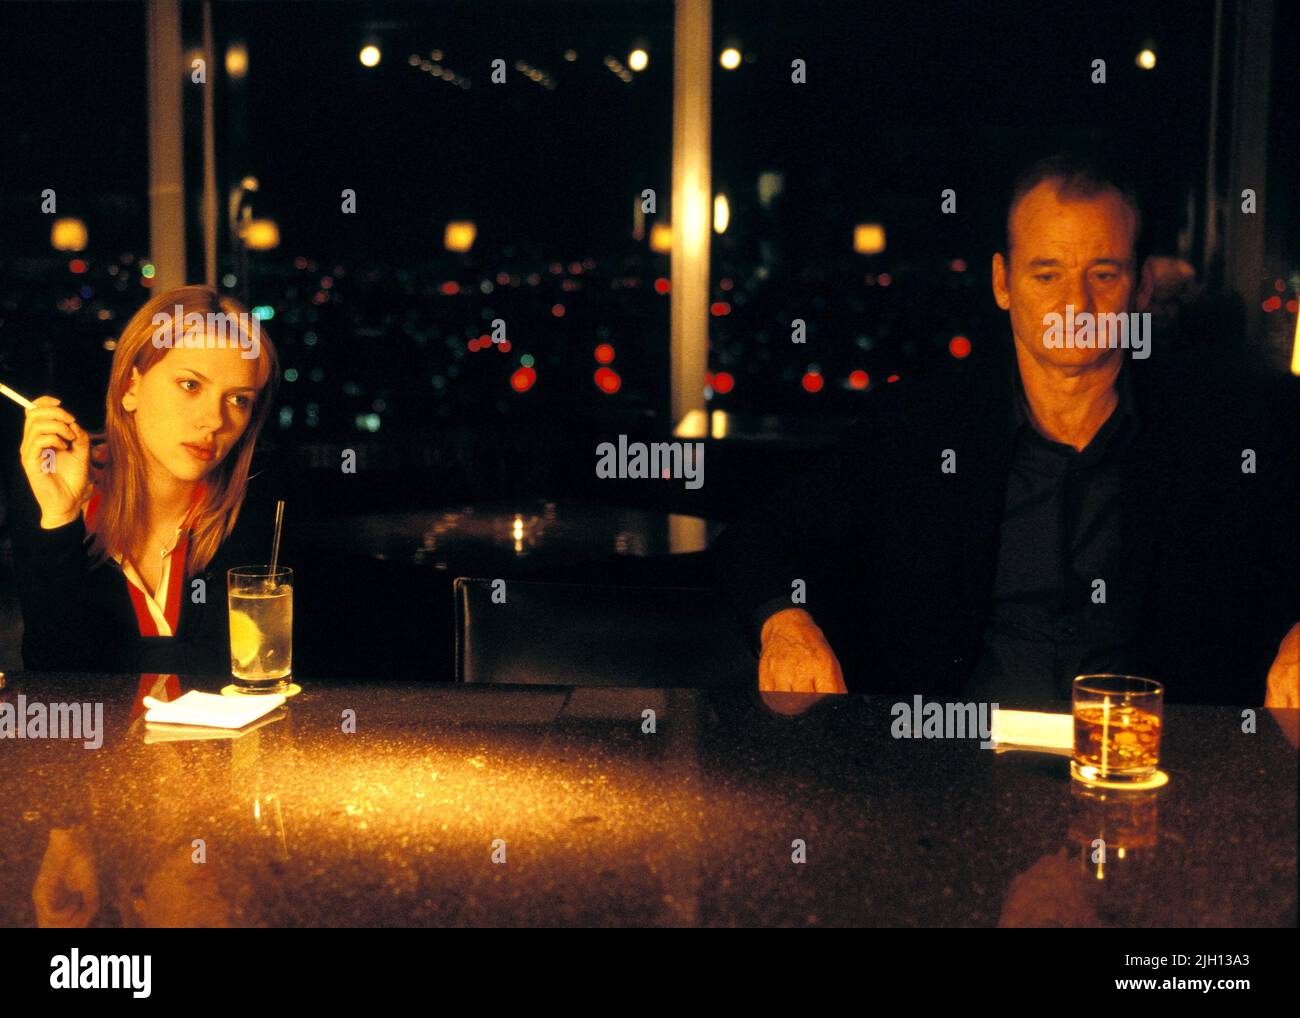 JOHANSSON, MURRAY, Lost in Translation, 2003 Banque D'Images